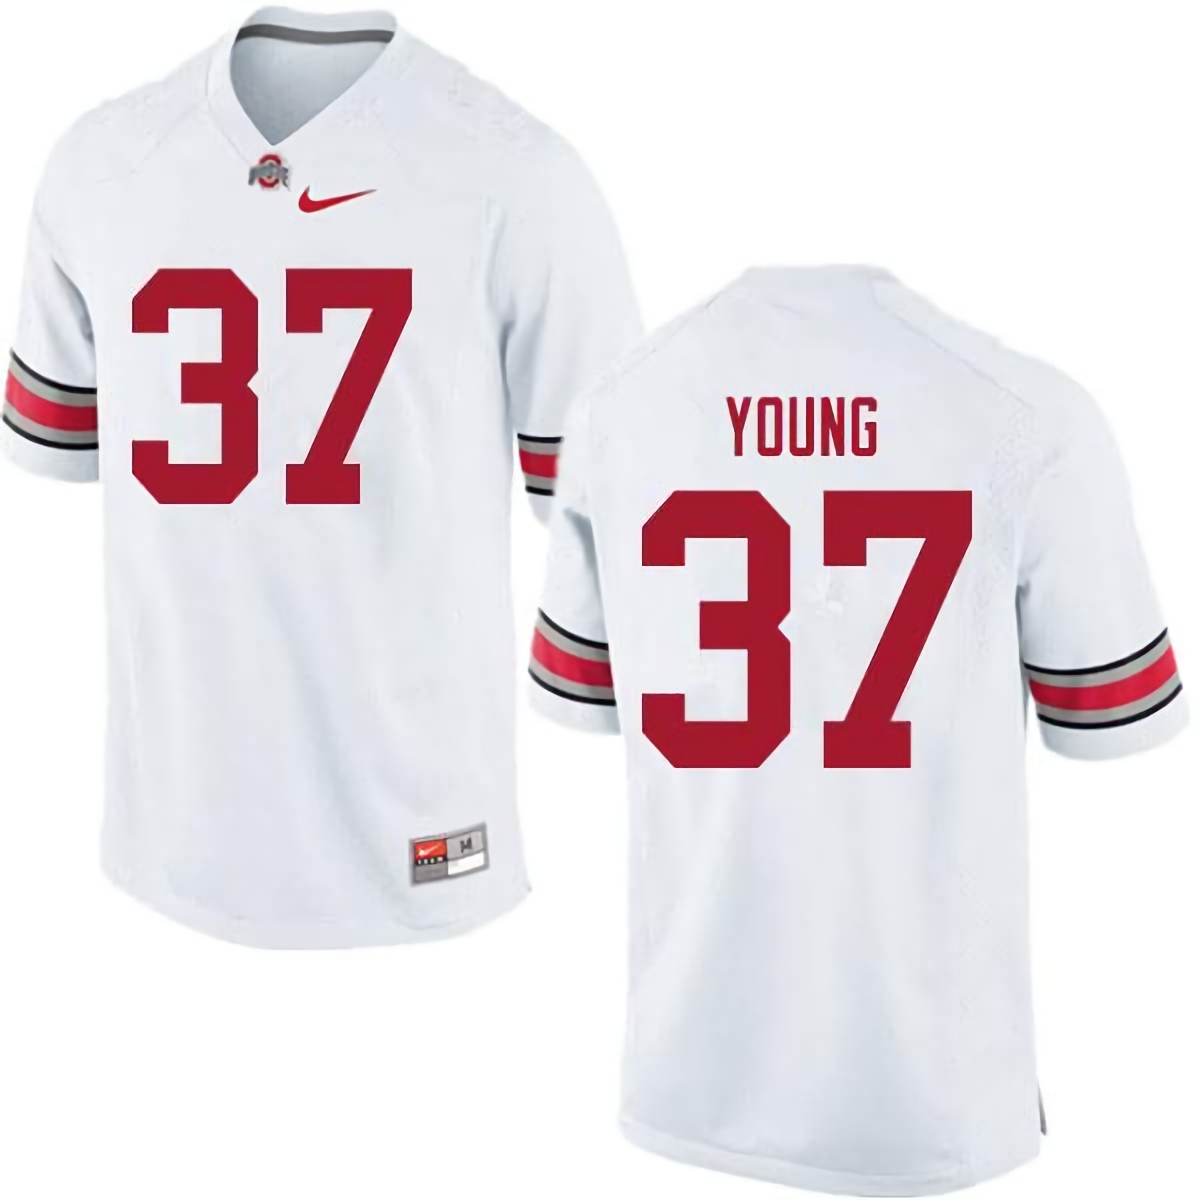 Craig Young Ohio State Buckeyes Men's NCAA #37 Nike White College Stitched Football Jersey LFQ4556JJ